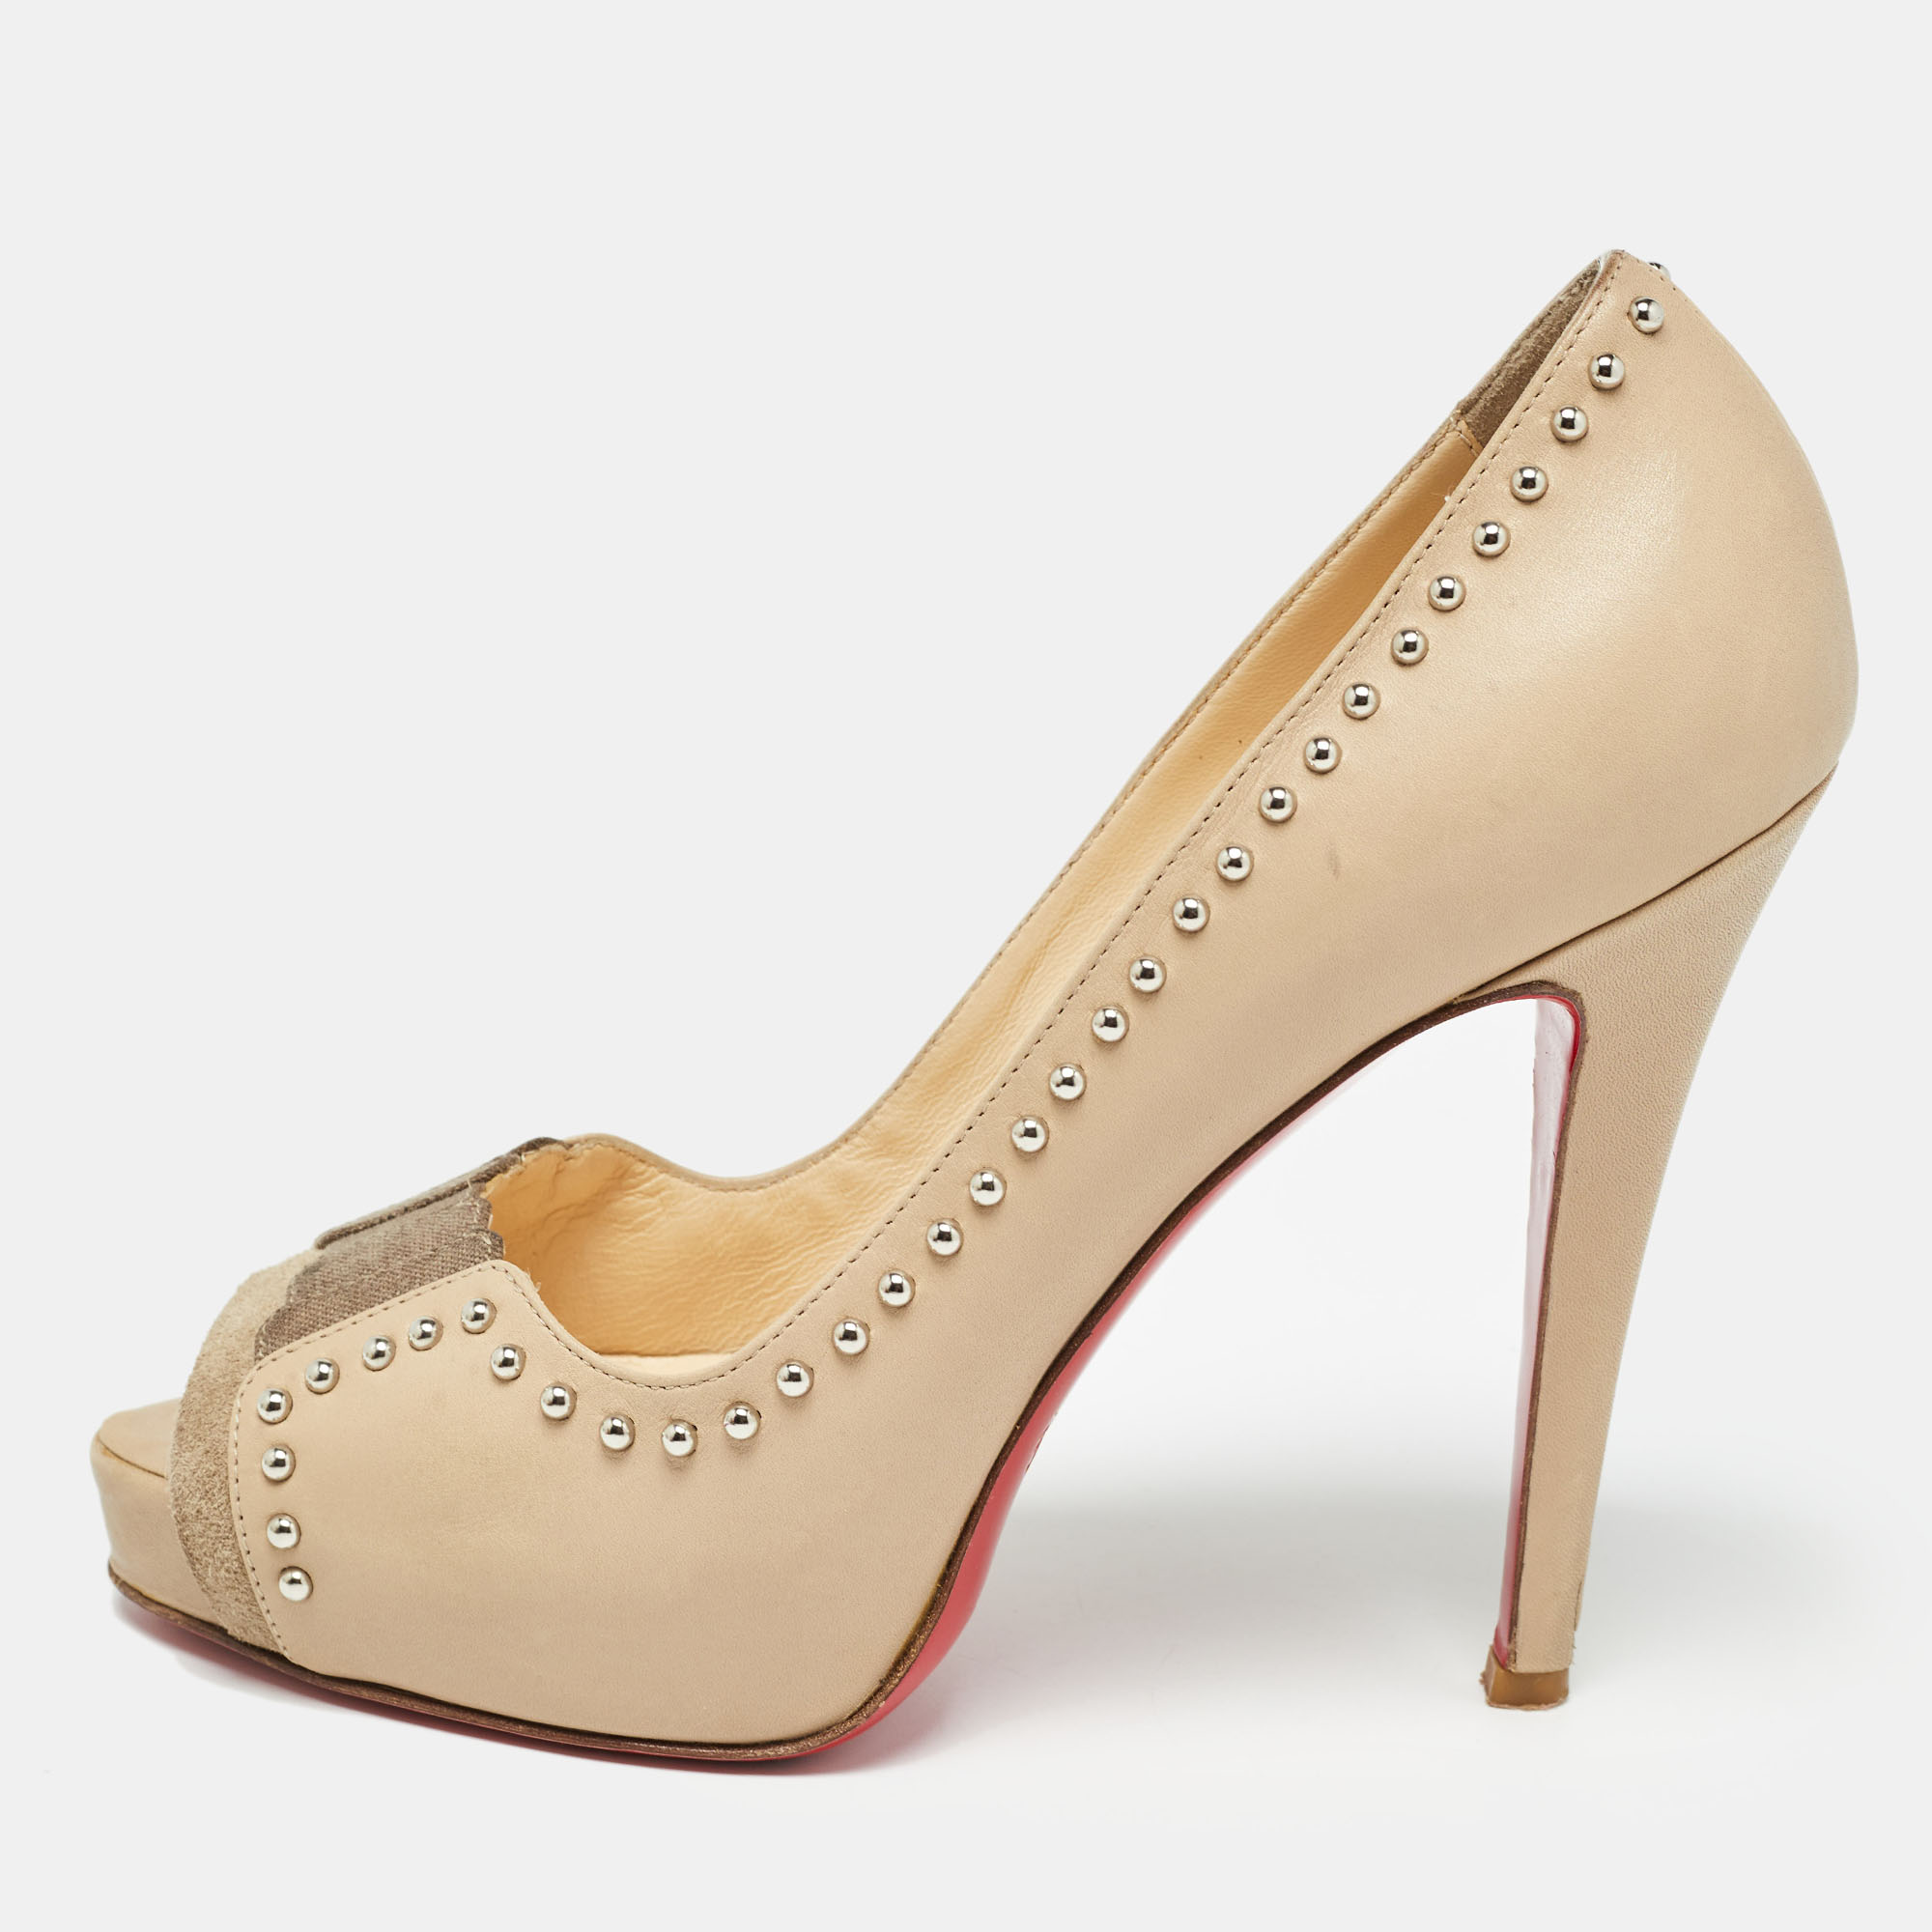 Christian louboutin beige leather and suede open toe  pumps size 37.5